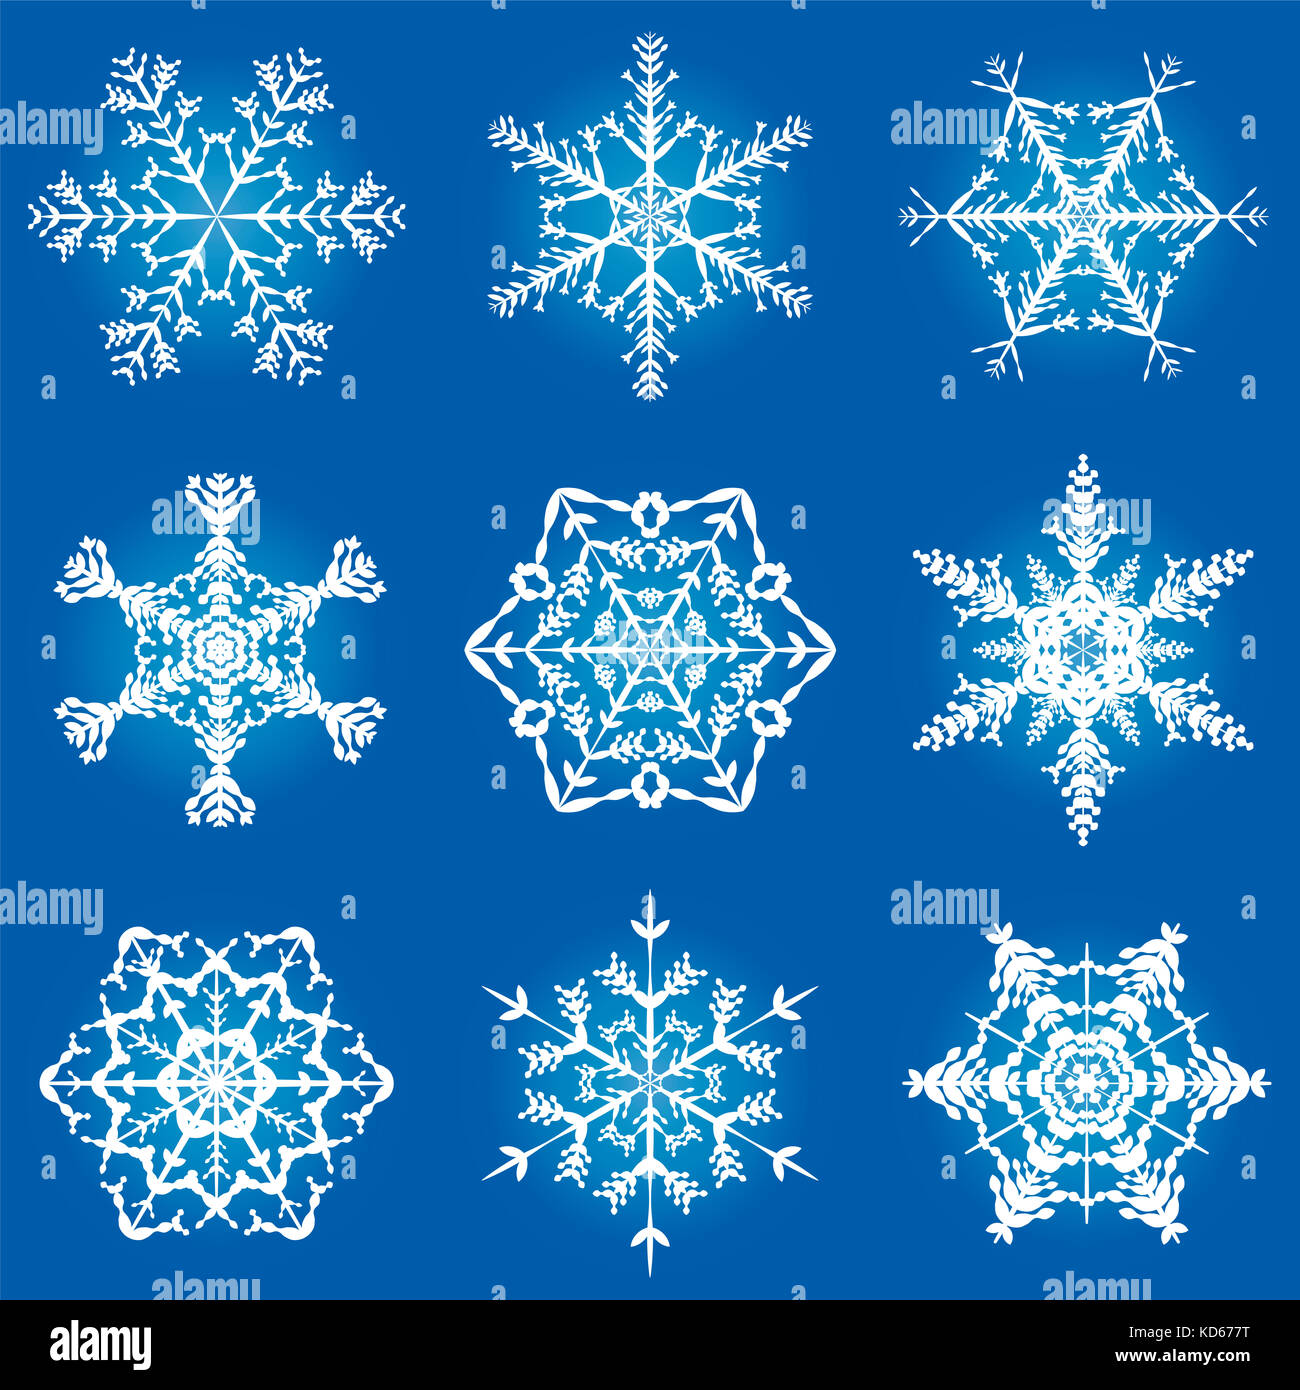 Snowflakes ornate pattern - nine filigree, graceful, delicate illustration snowflakes on square format blue gradient background. Stock Photo